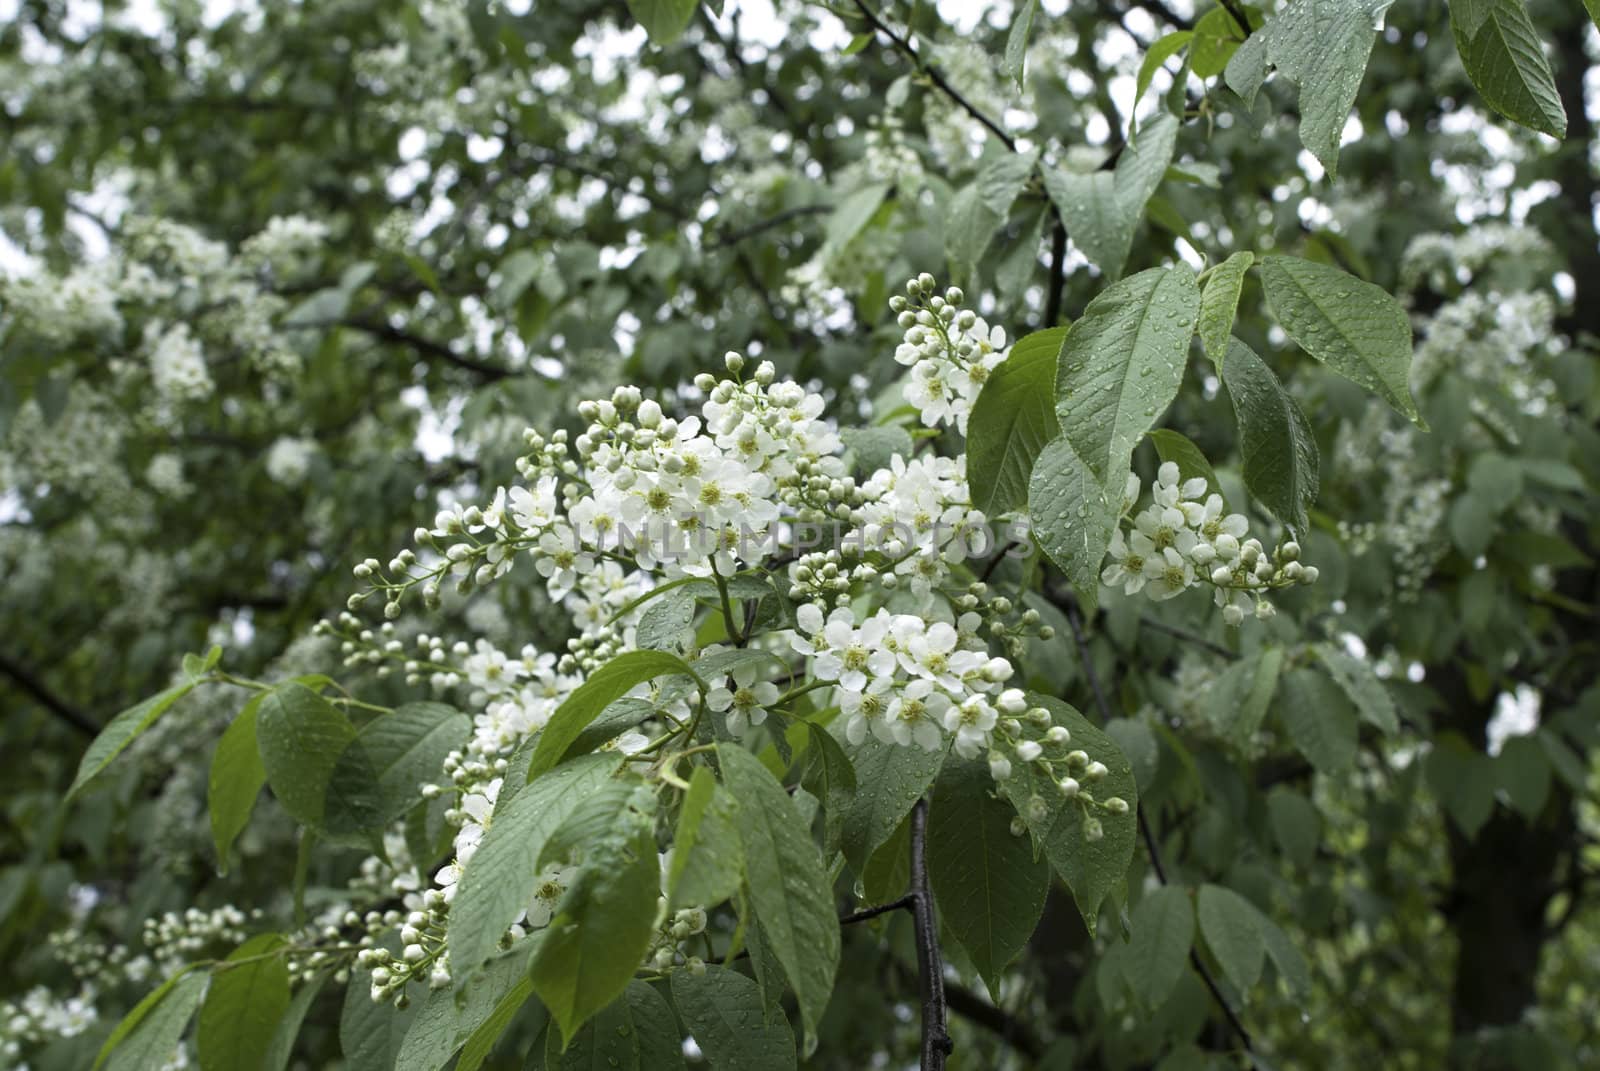 Tree (bird cherry) after rain with drops of water